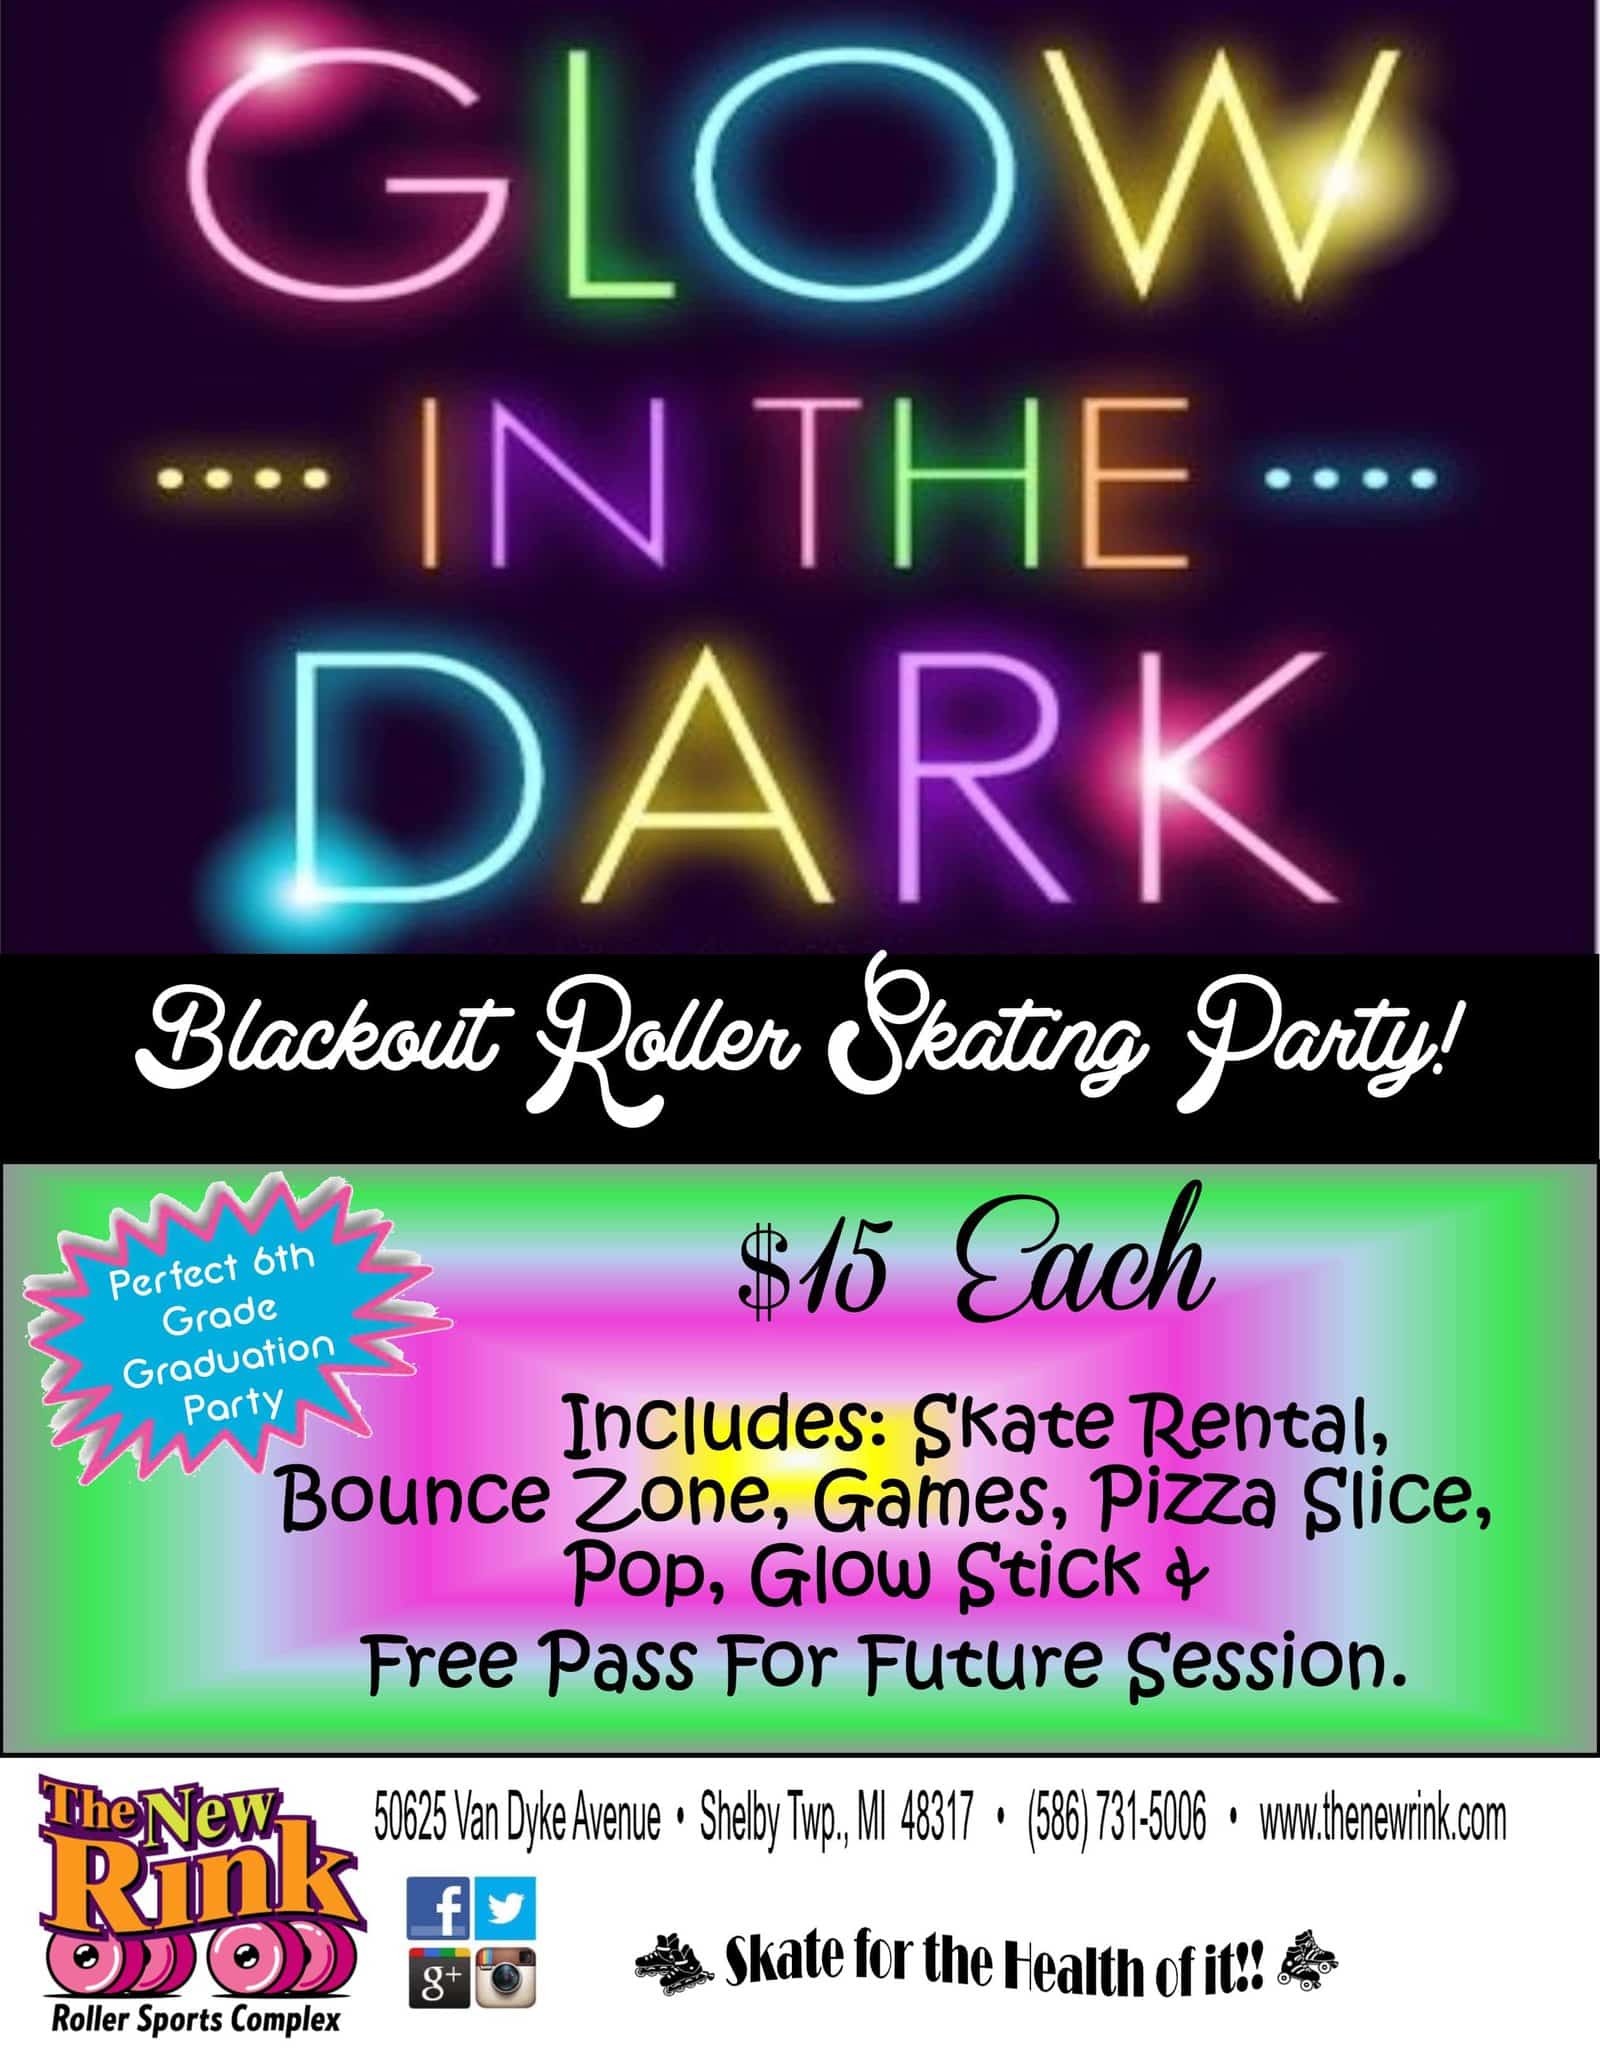 the-new-rink-glow-in-the-dark-bblackout-roller-skating-party-image